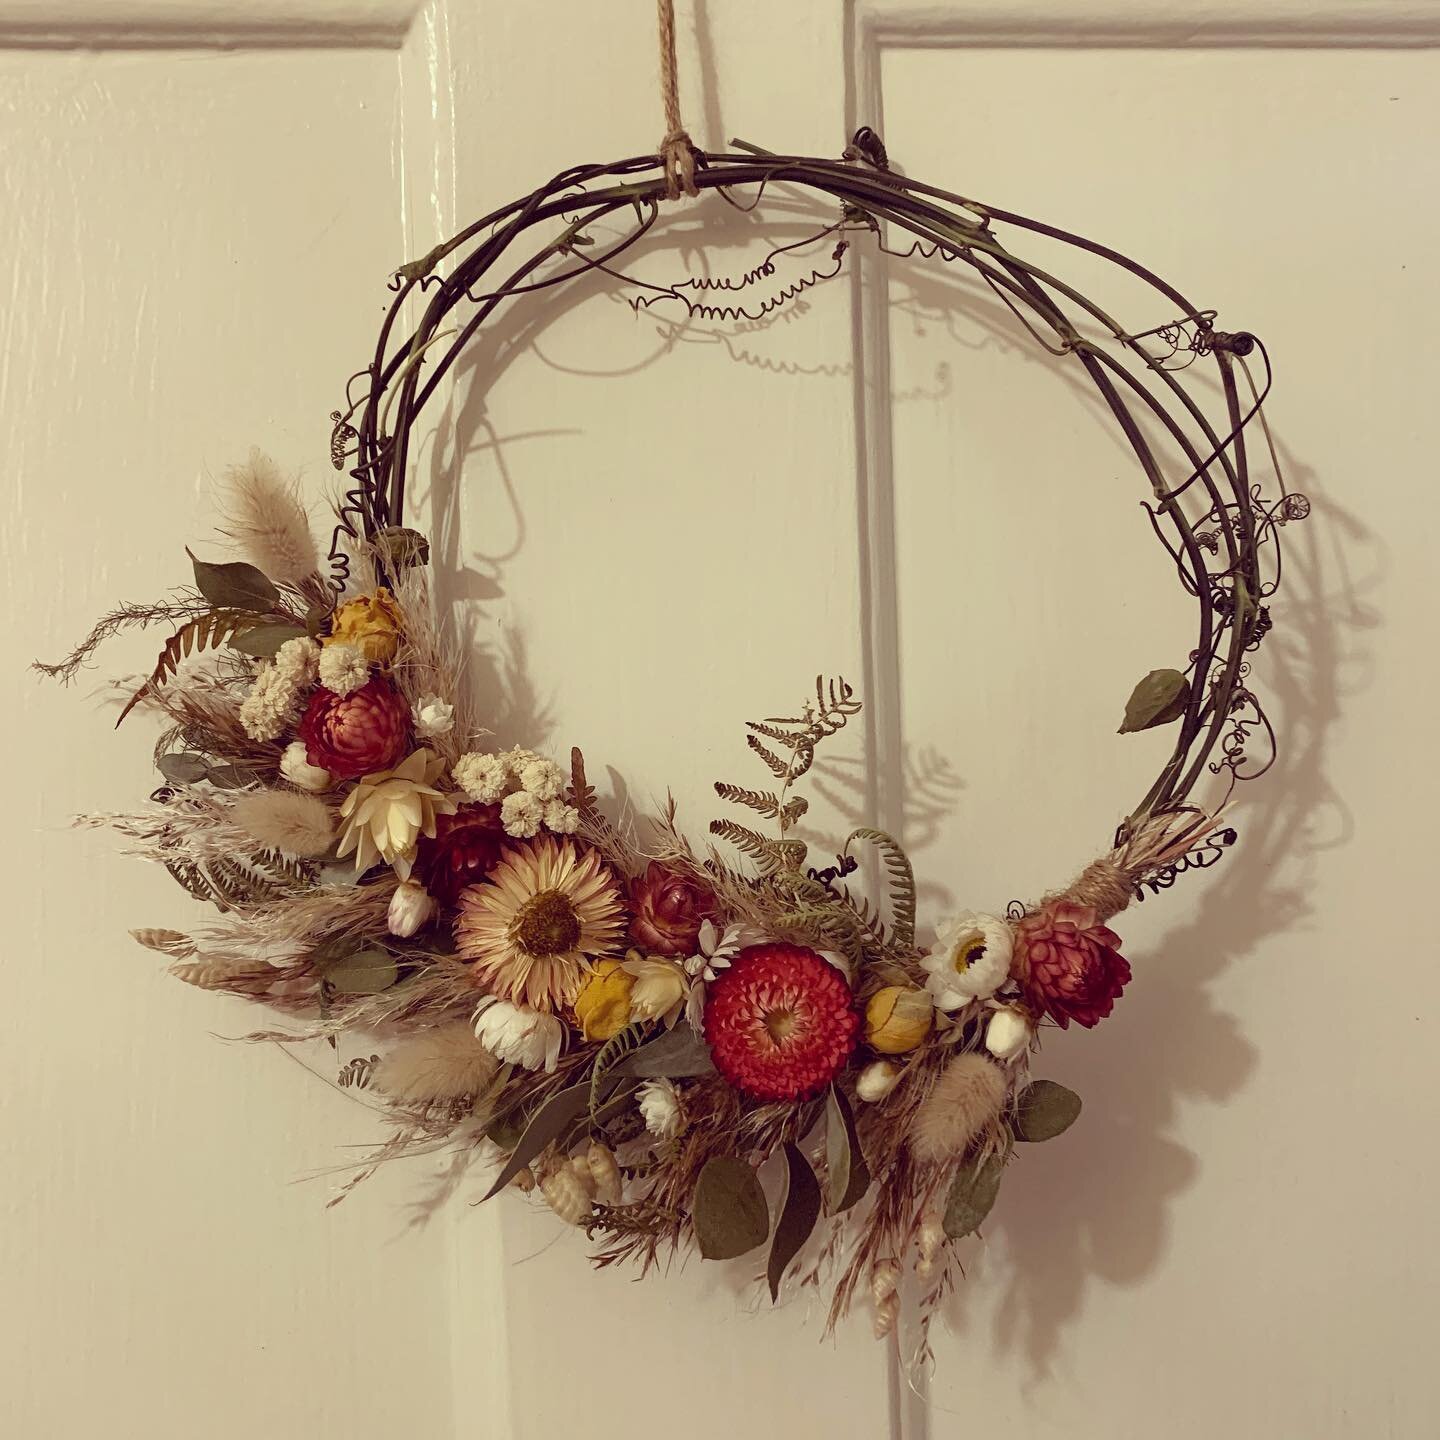 Completely love this beautiful wreath from the very talented @twigandtwineonsea 🧡

#flowerwreath #driedflowers #consideredhome #twigandtwineonsea #interiordetailing #supportsmallbusiness #shopsmall